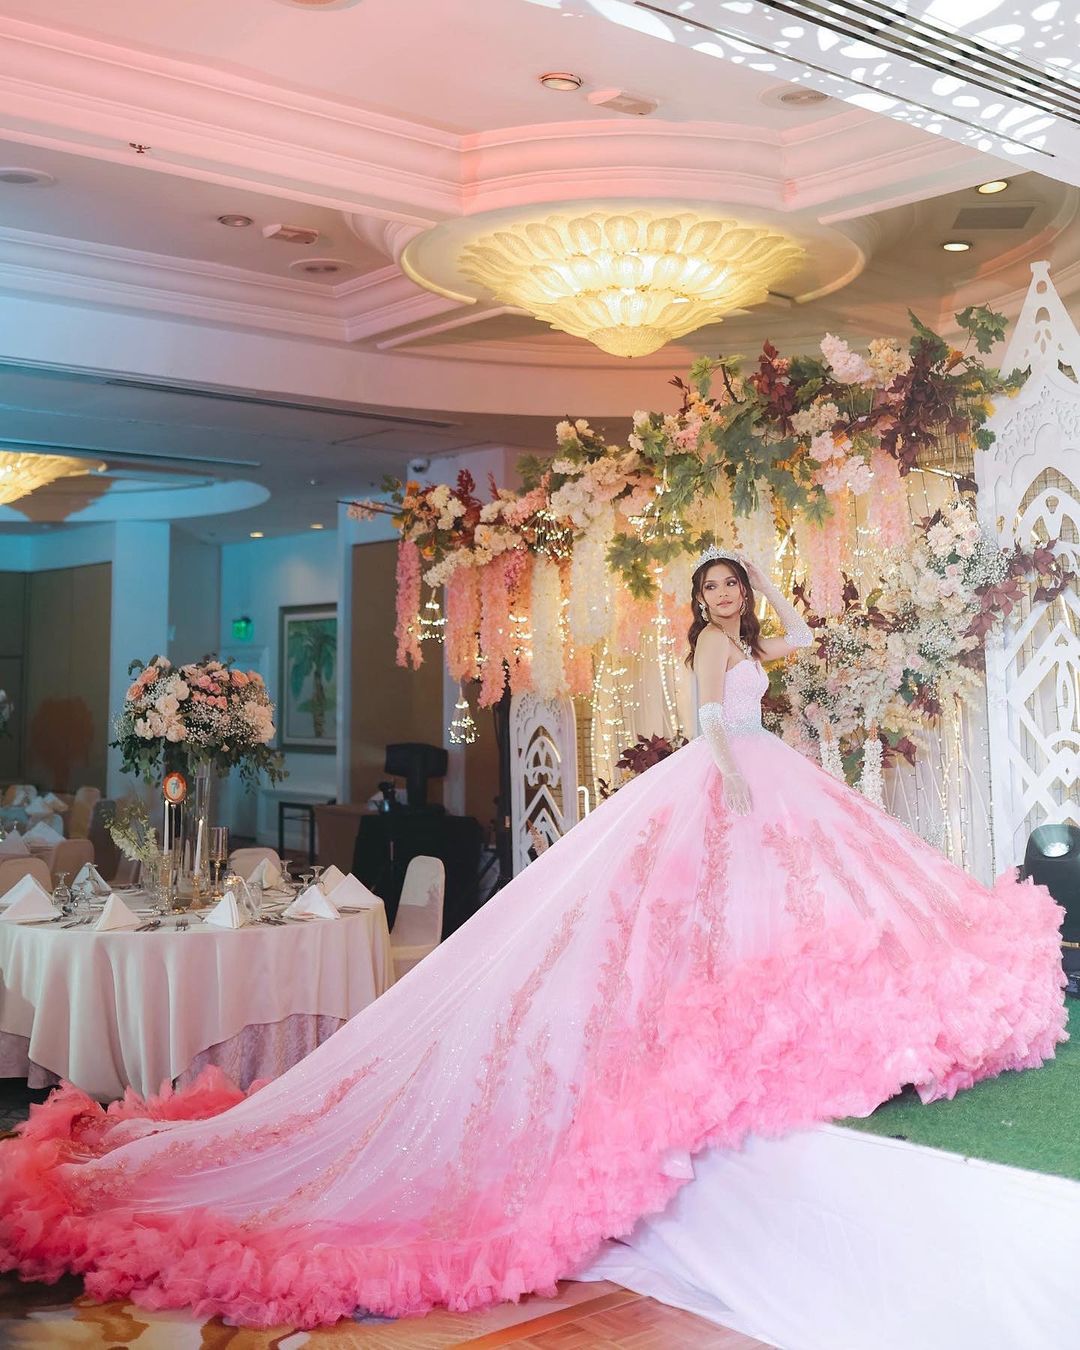 LOOK: Althea Ablan's Dainty 18th Birthday Party